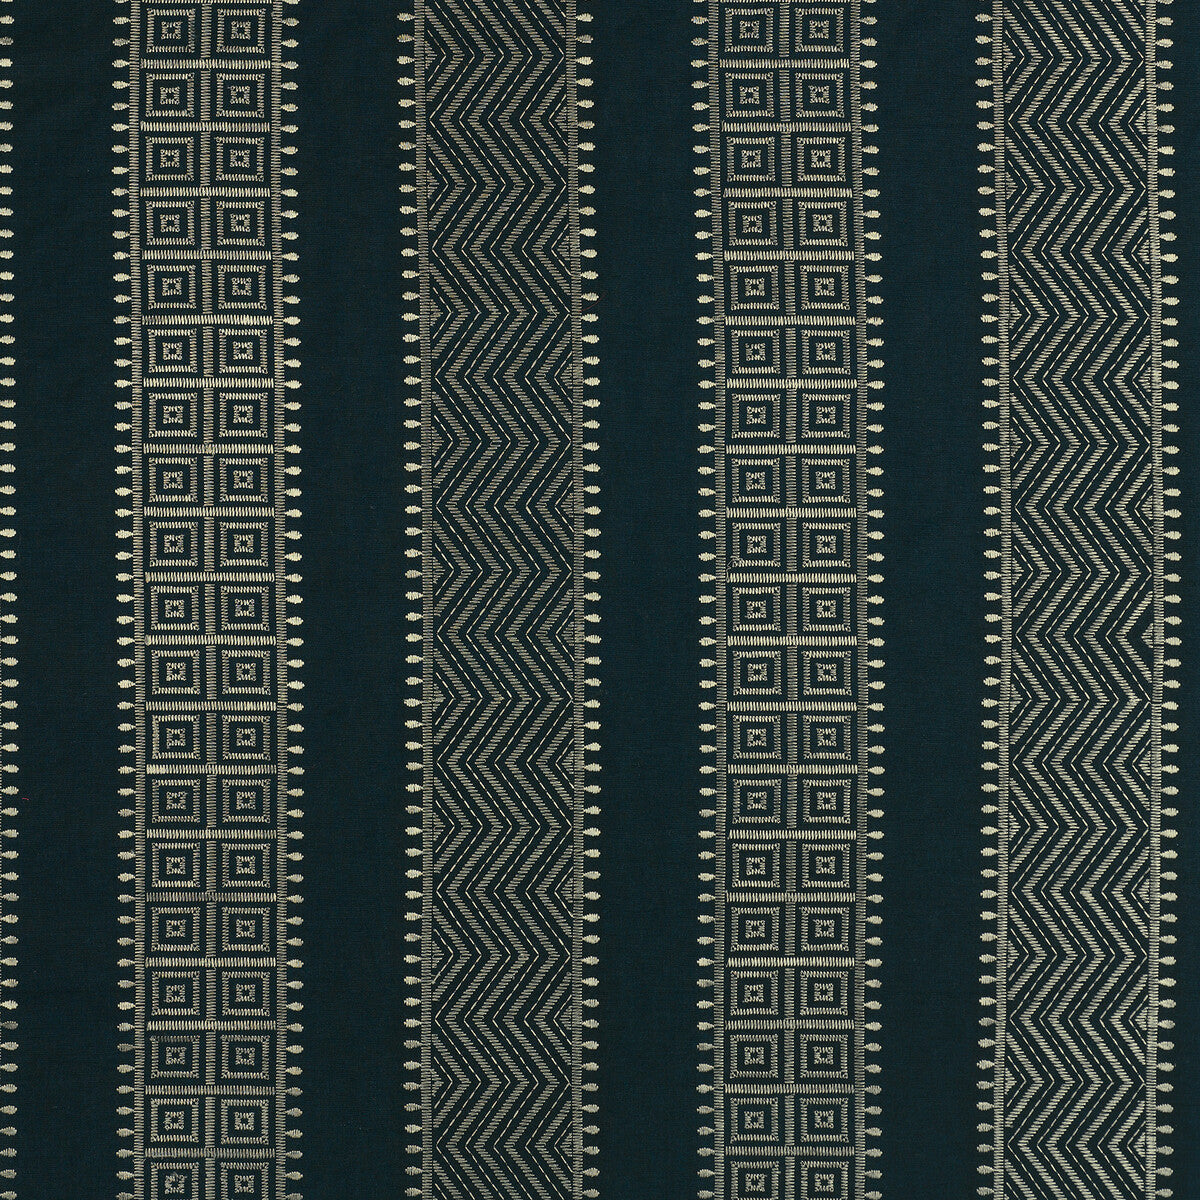 Variation fabric in indigo color - pattern ED85239.680.0 - by Threads in the Variation collection